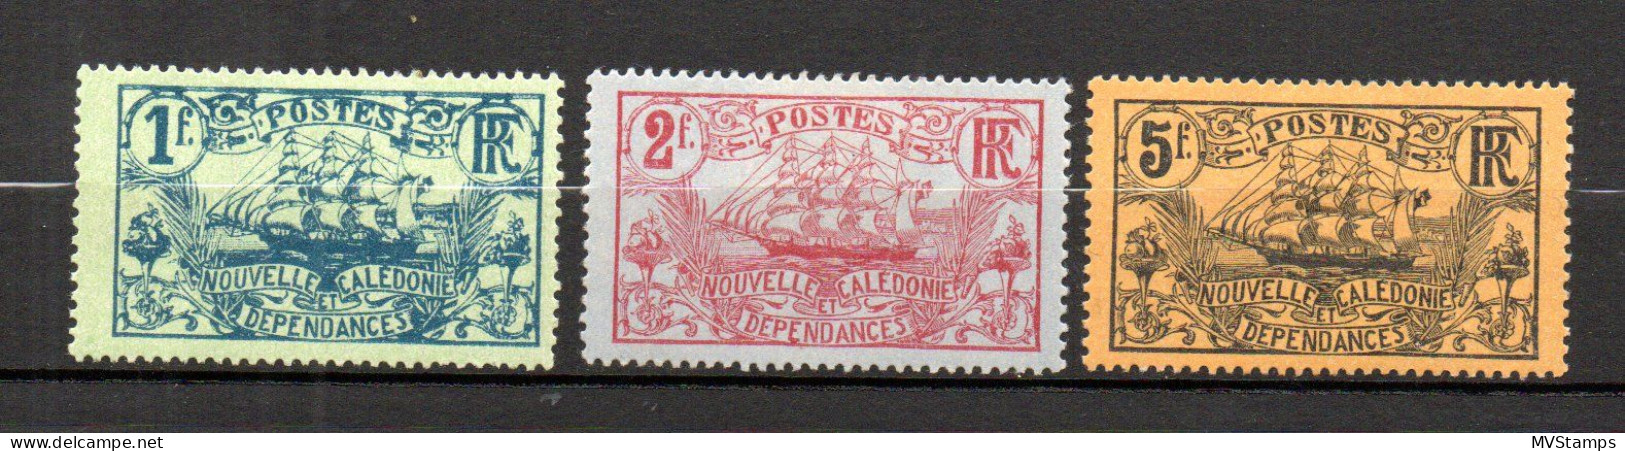 New Caledonia 1905 Old High Values Def. Stamps (Michel 99/101) MLH - Unused Stamps